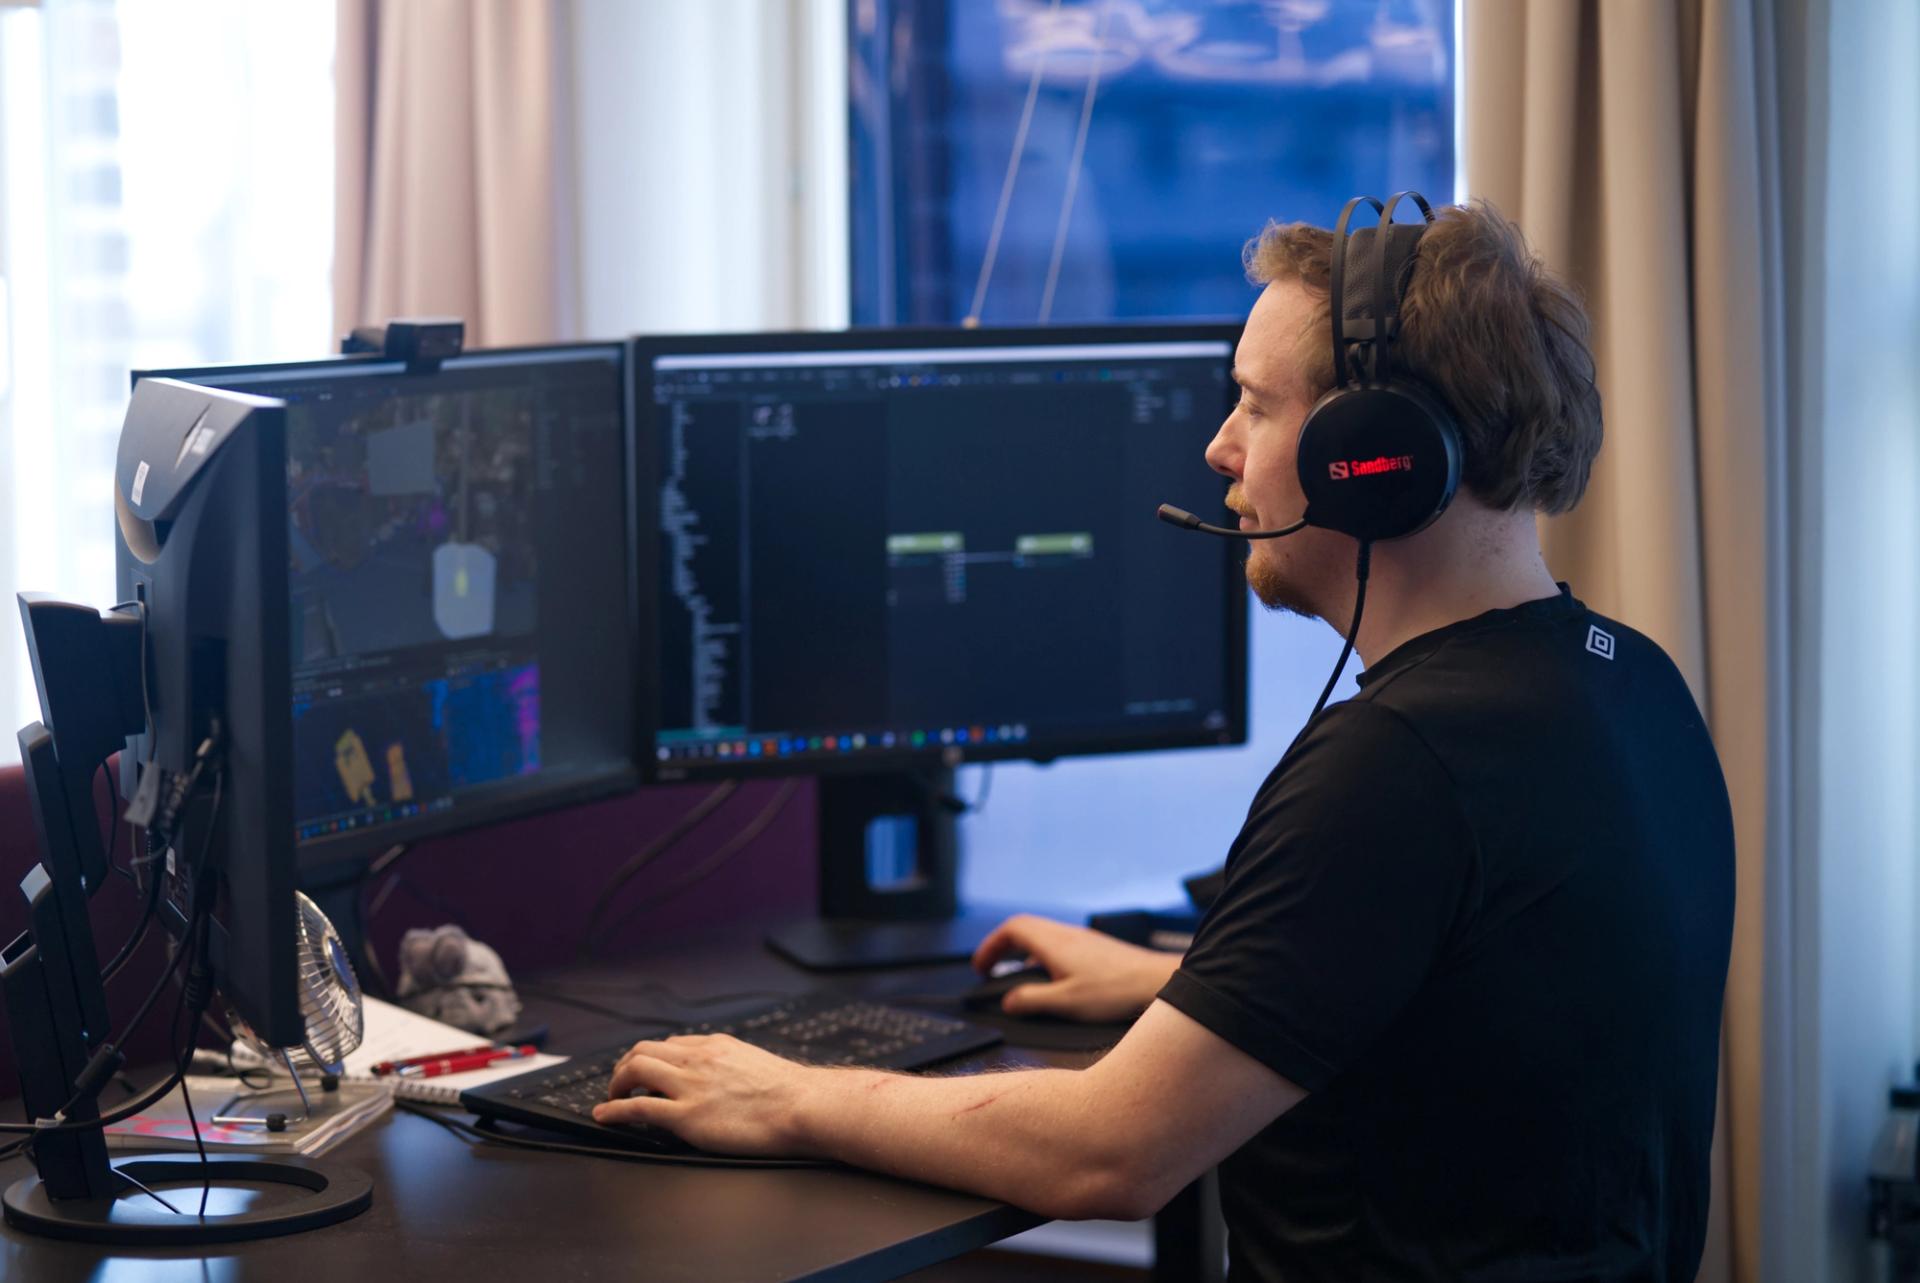 Employee with headset on standing at three screened computer setup, using different game development software